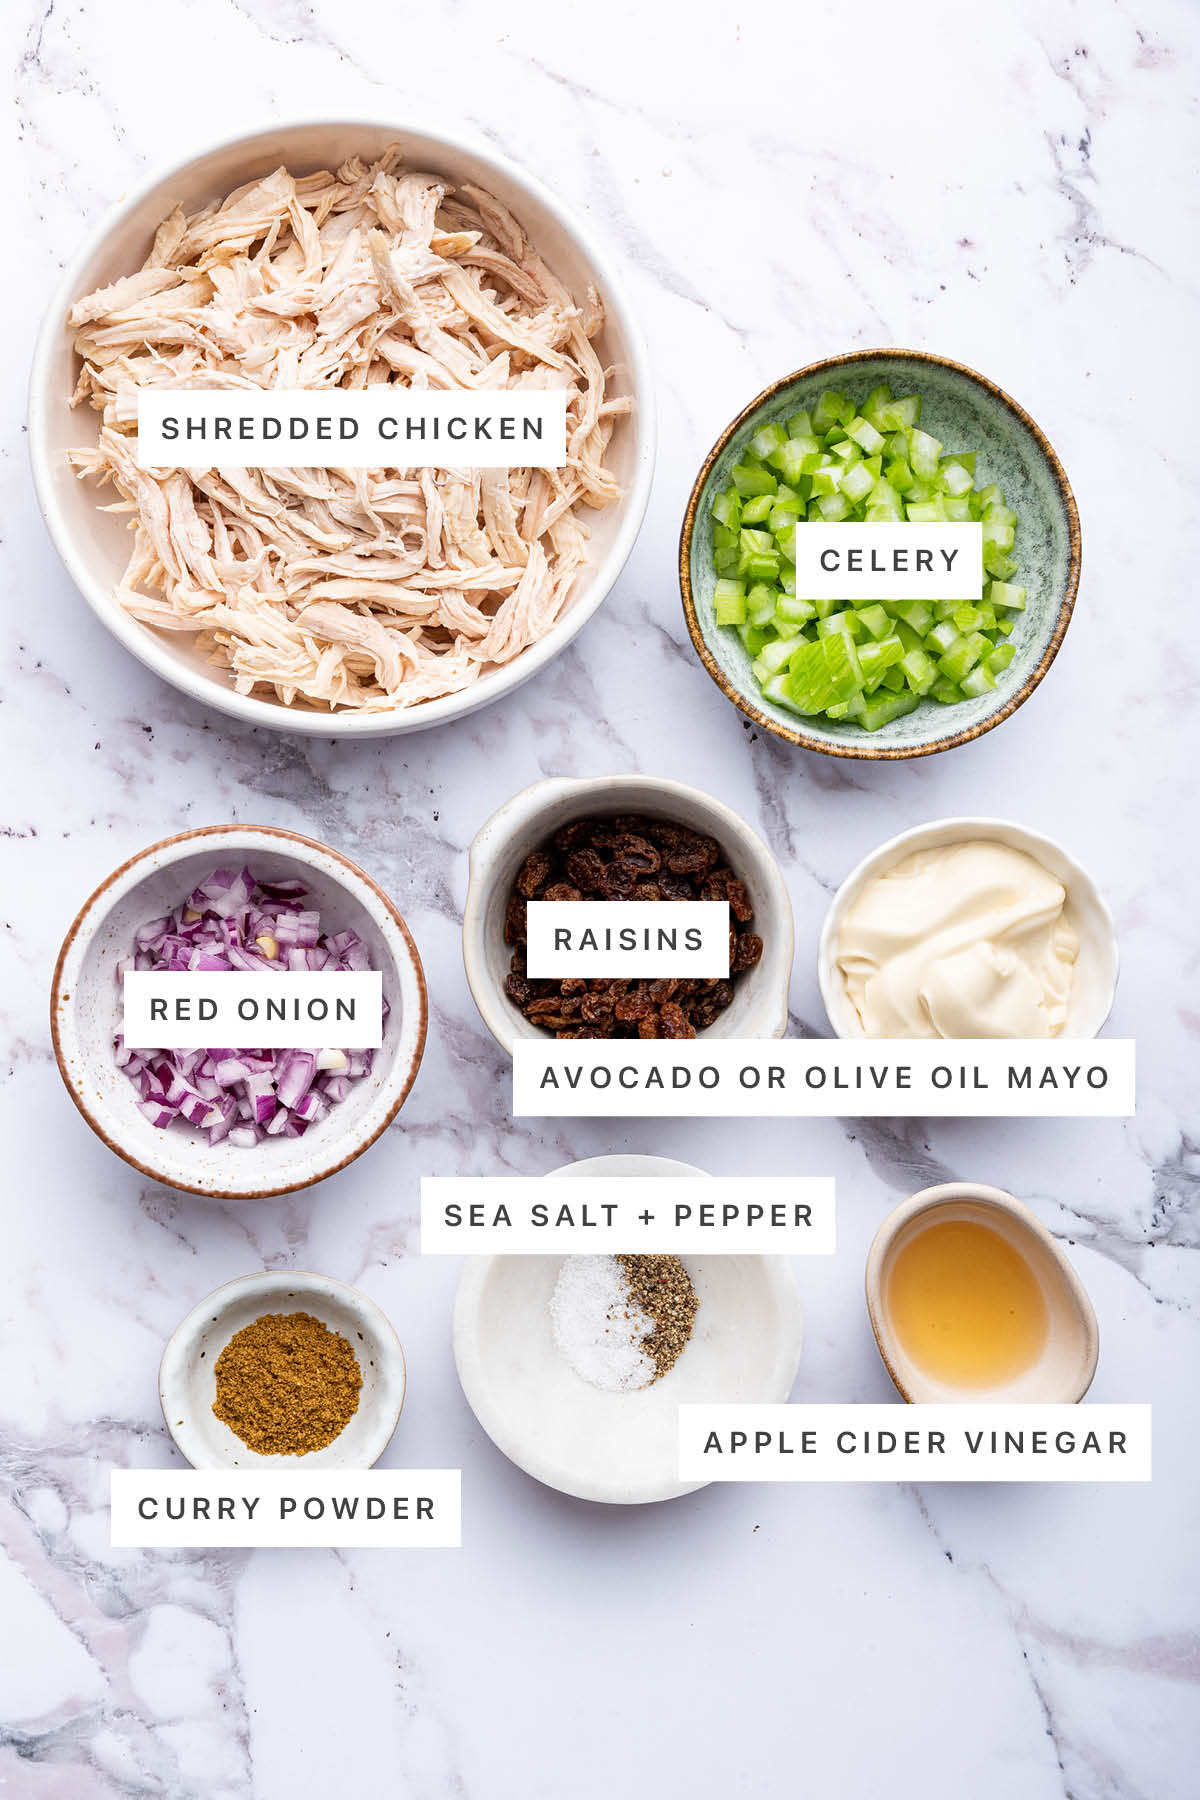 Ingredients measured out to make Curry Chicken Salad: shredded chicken, celery, red onion, raisins, avocado or olive oil mayo, curry powder, sea salt, pepper and apple cider vinegar.